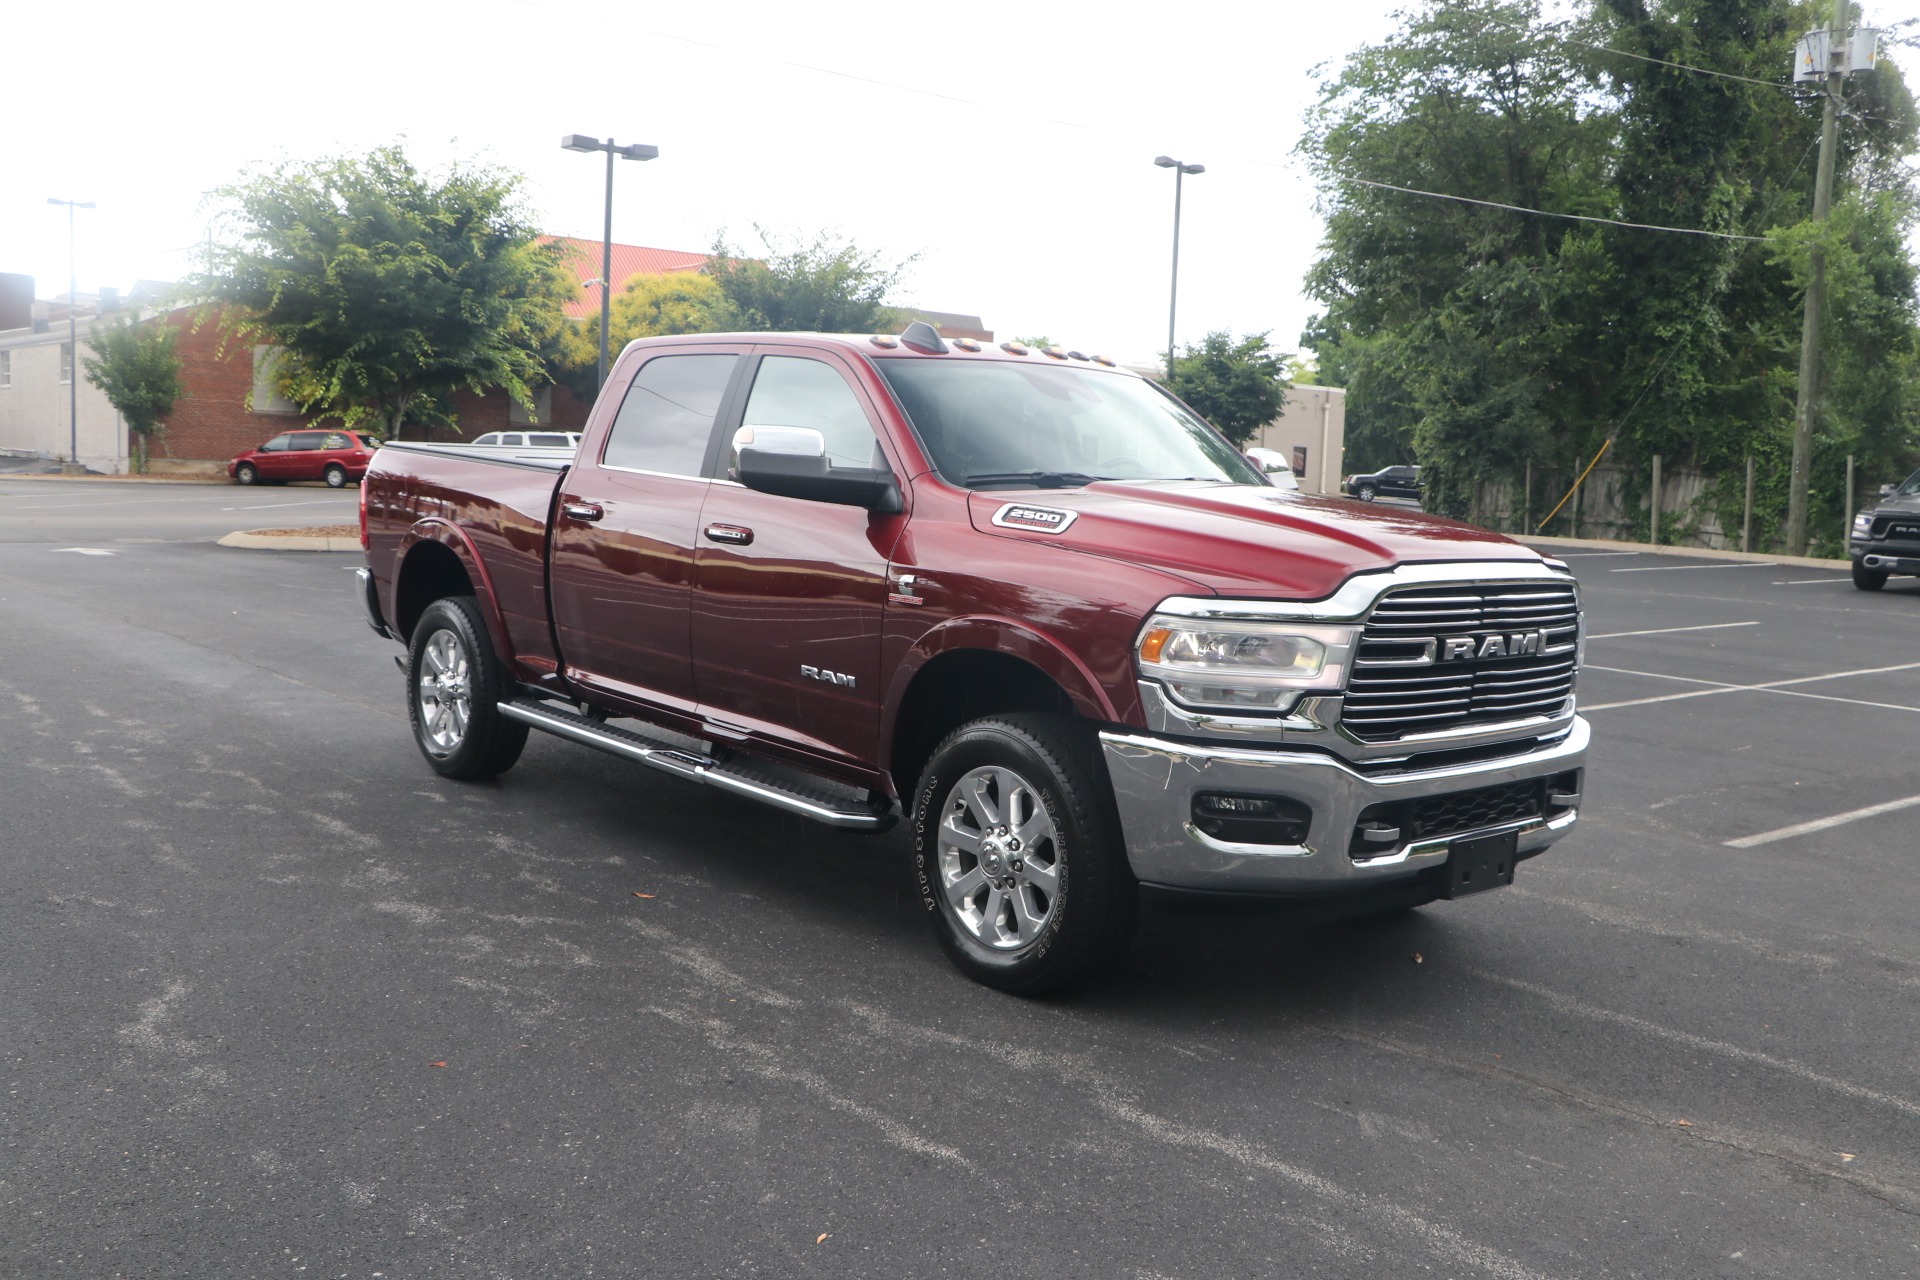 One sentence damage article Used 2019 Ram Ram 2500 LARAMIE CREW CAB 4X4 DIESEL W/NAV For Sale ($73,950)  | Auto Collection Stock #566154